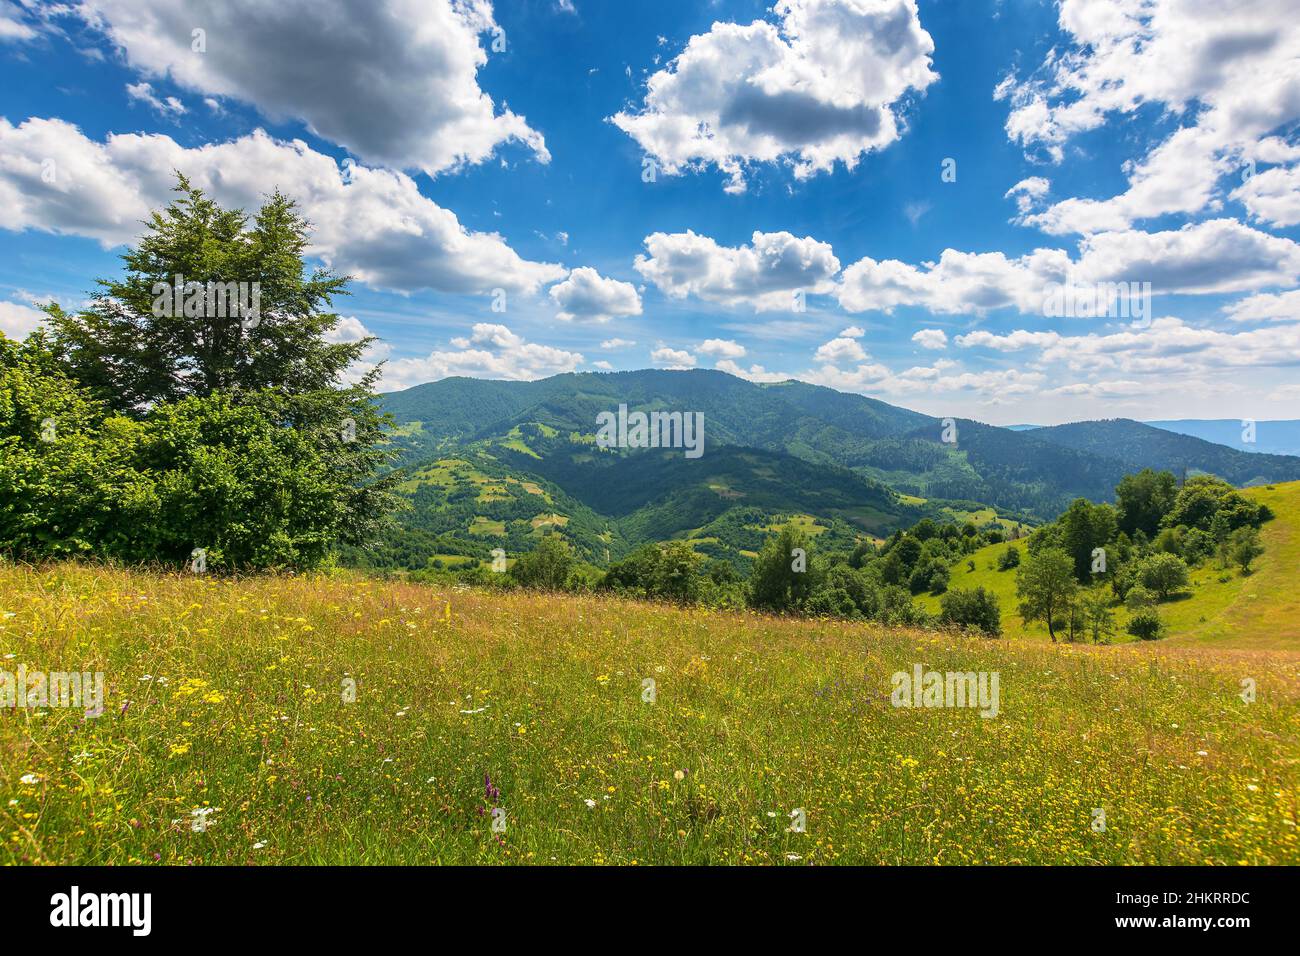 trees on a grassy field in mountains. scenic rural landscape with meadow in summer. countryside scenery on a sunny day. idyllic green nature backgroun Stock Photo